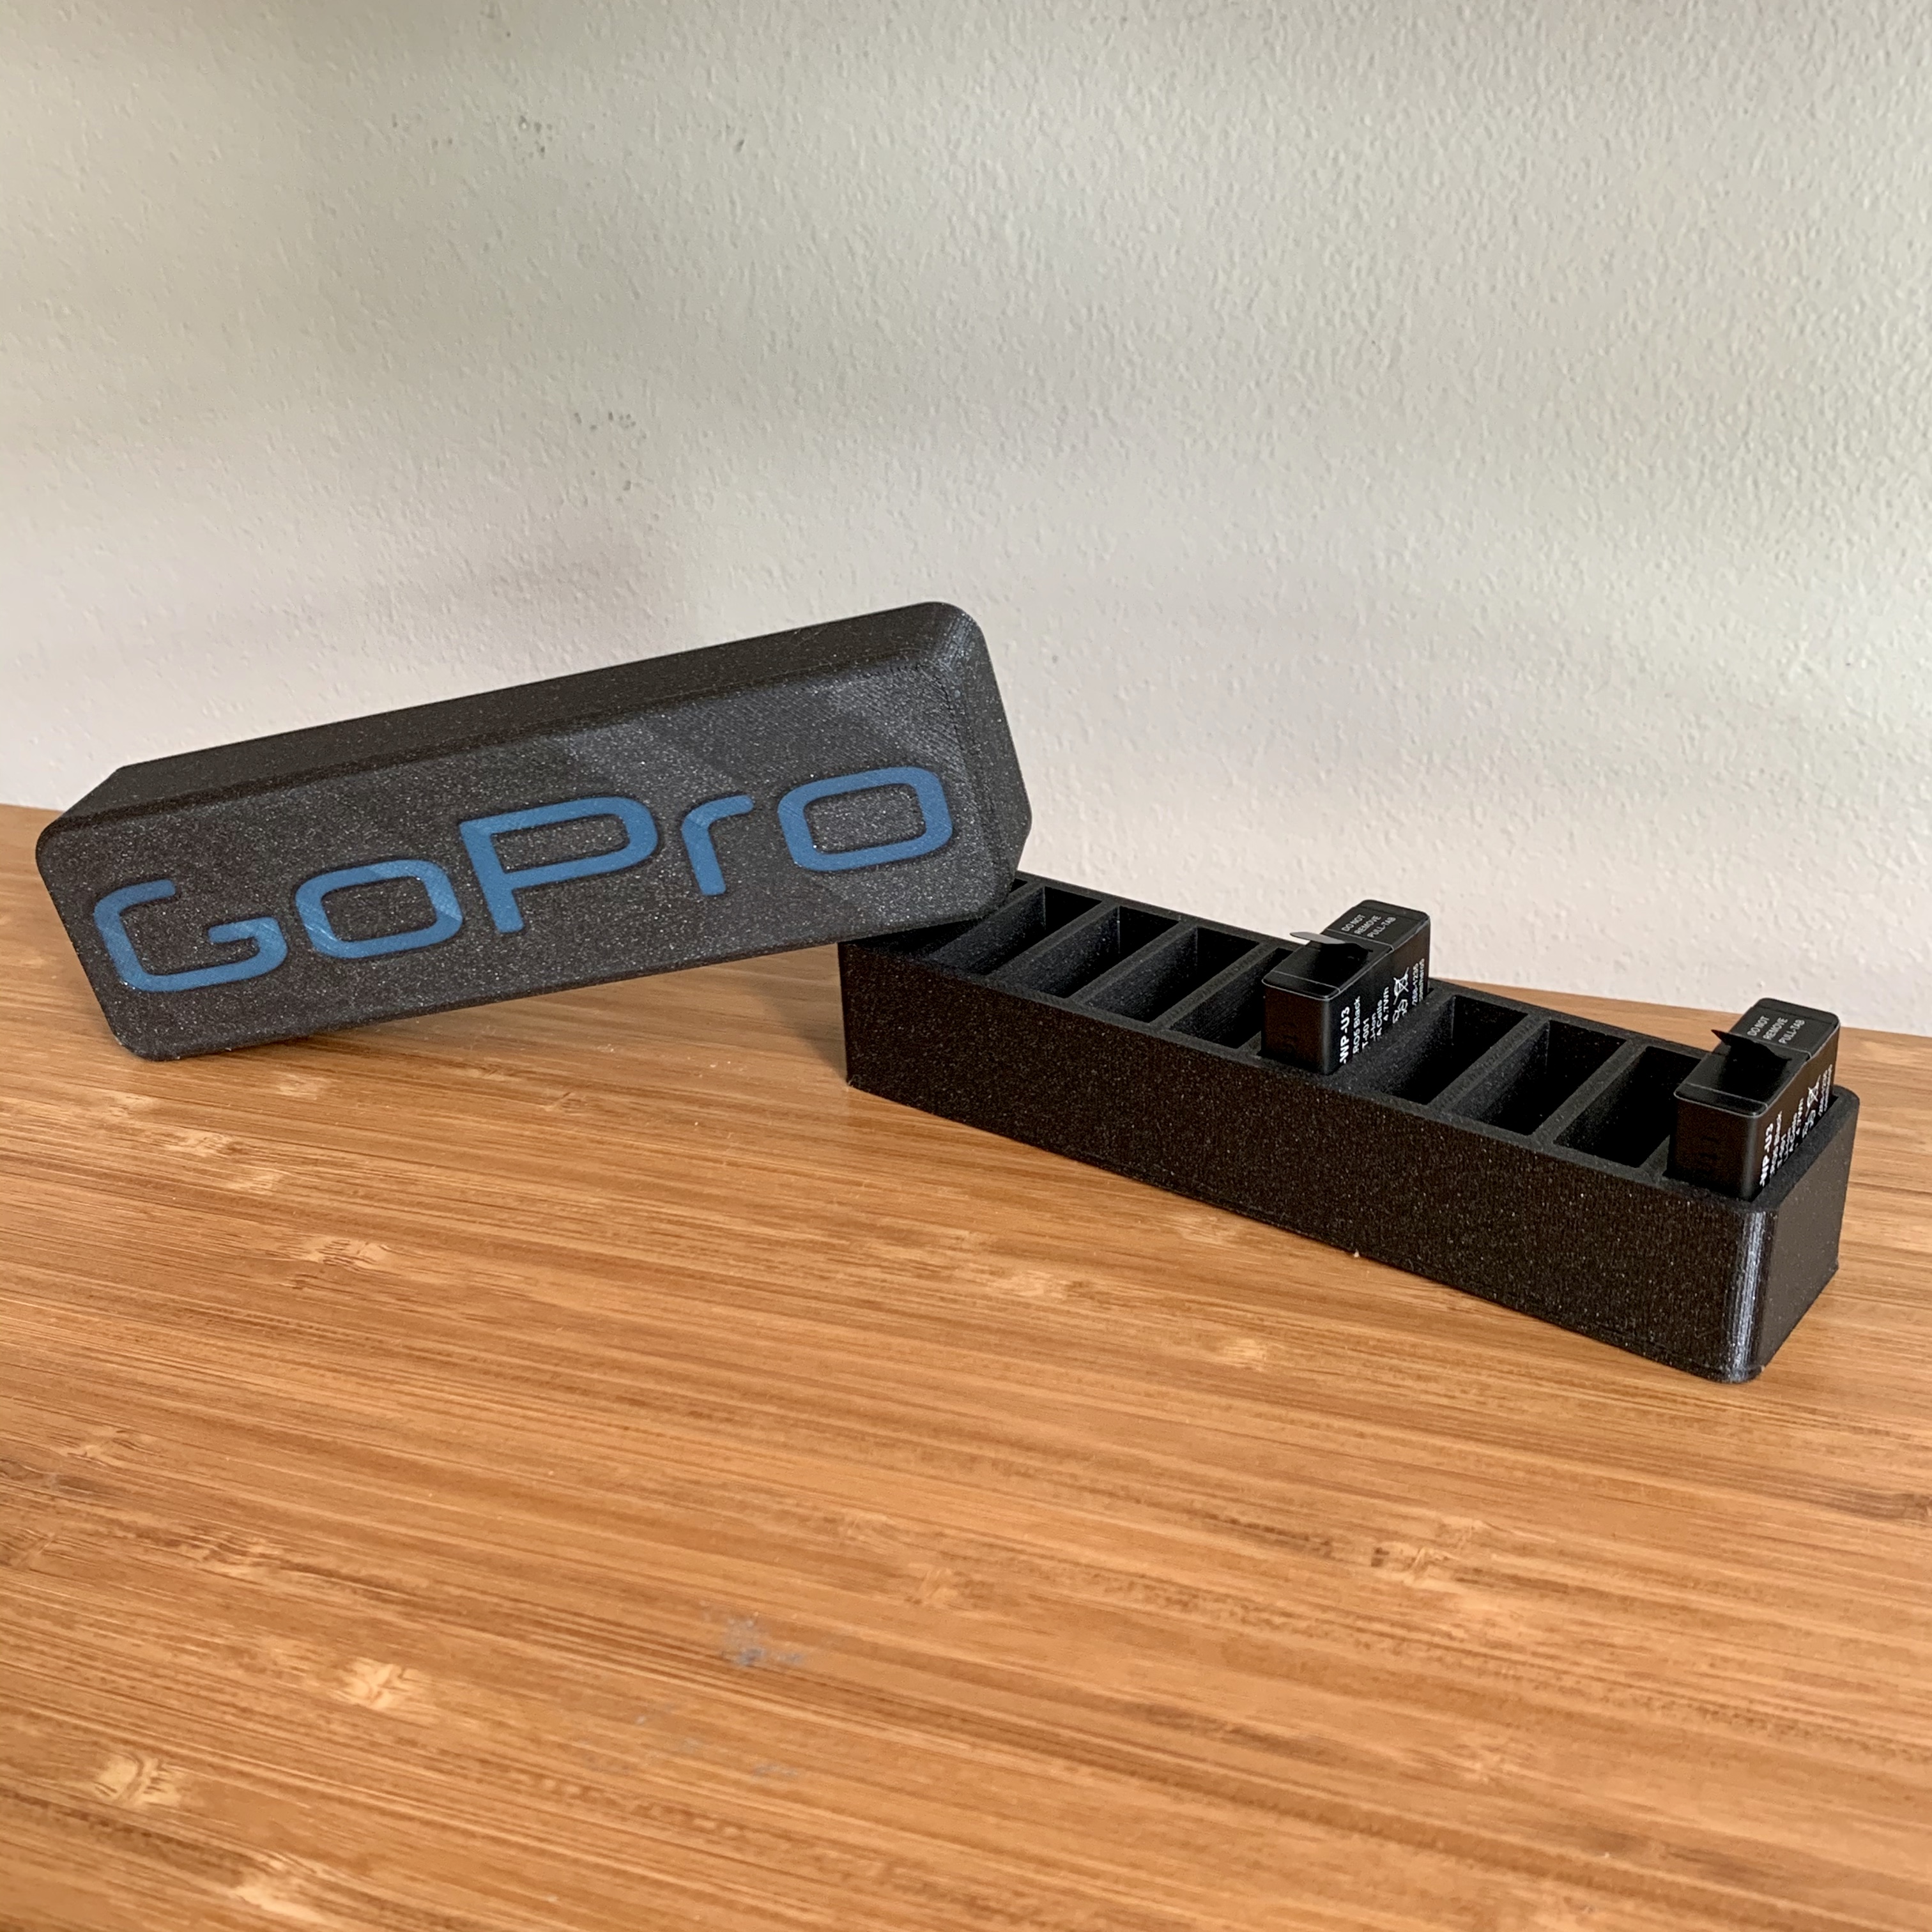 3D Printed GoPro Battery Box